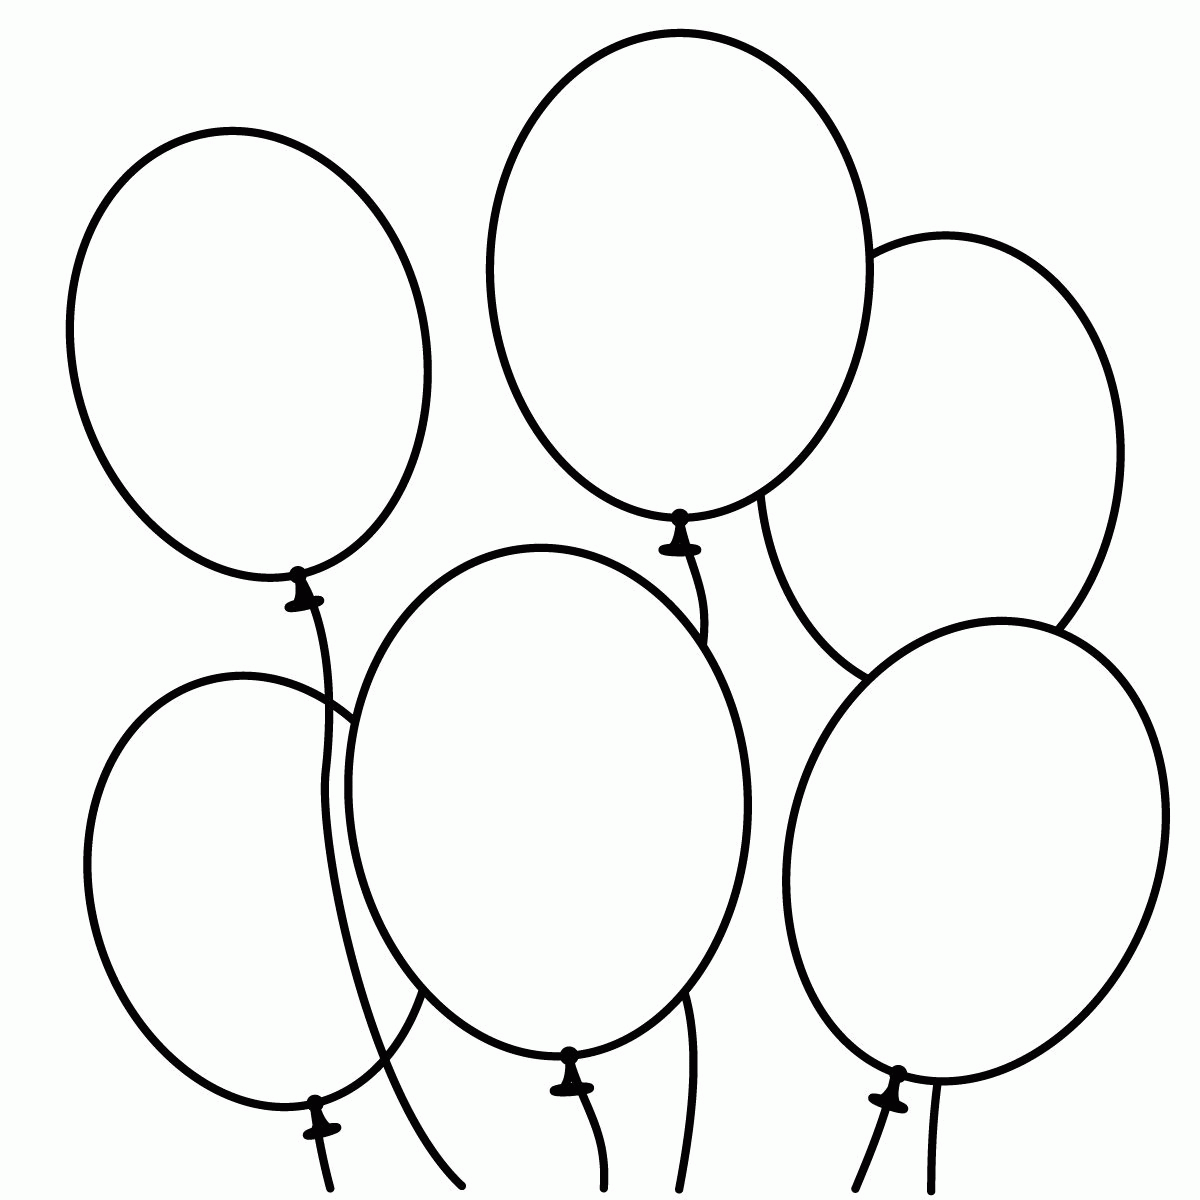 Balloon Coloring Pages For Preschool - Coloring Pages For All Ages